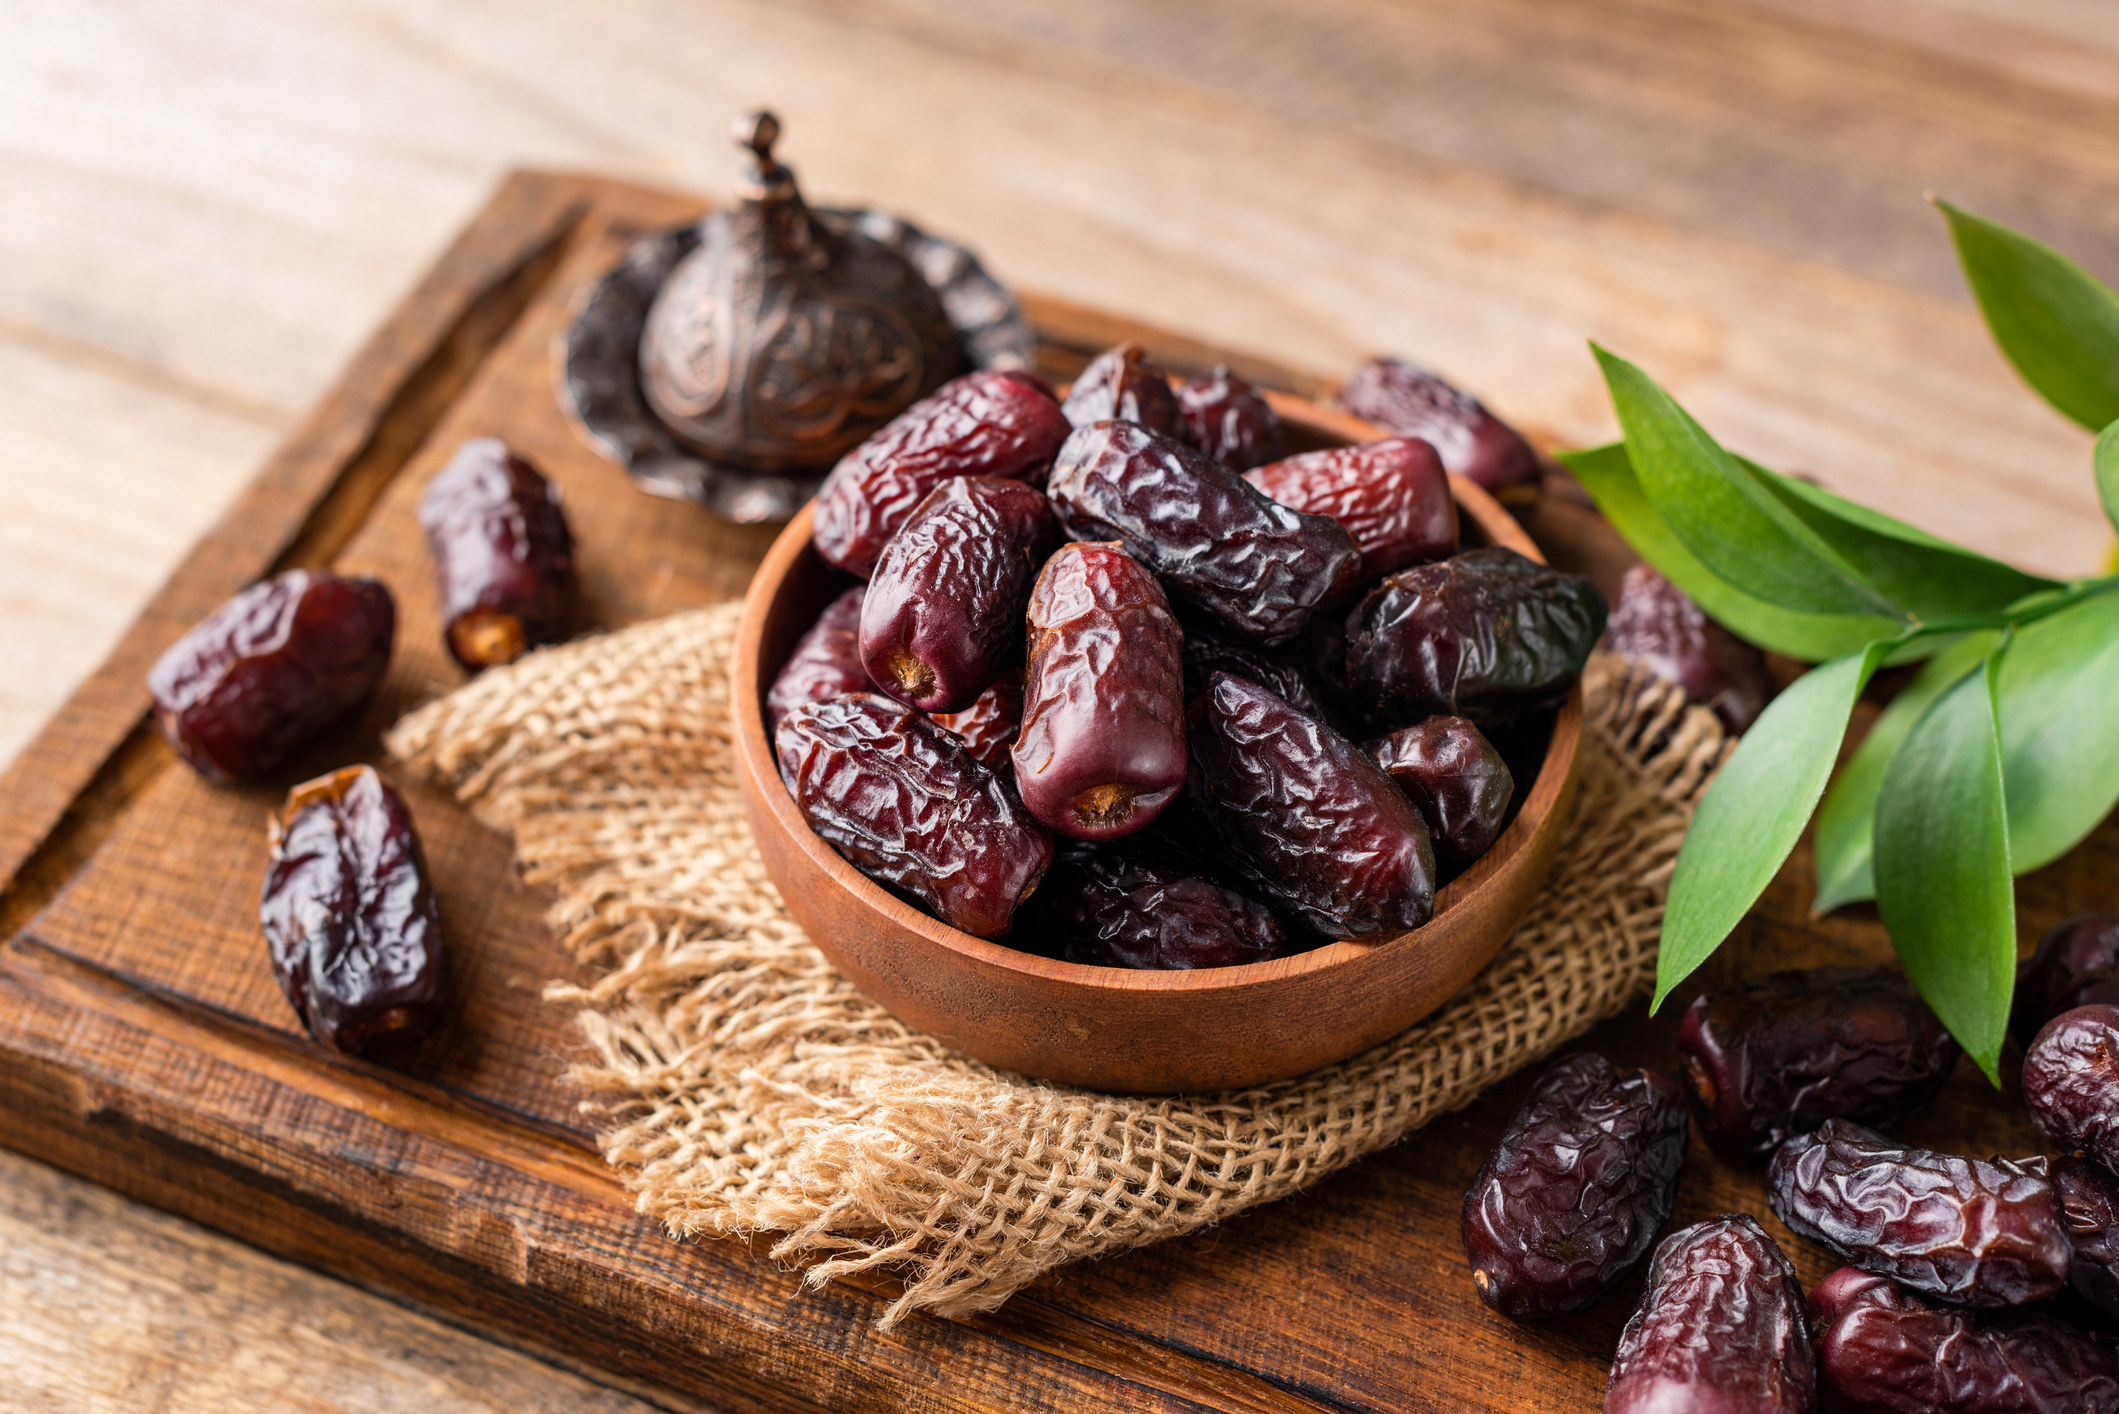 A bowl of dates sitting on a wooden board.